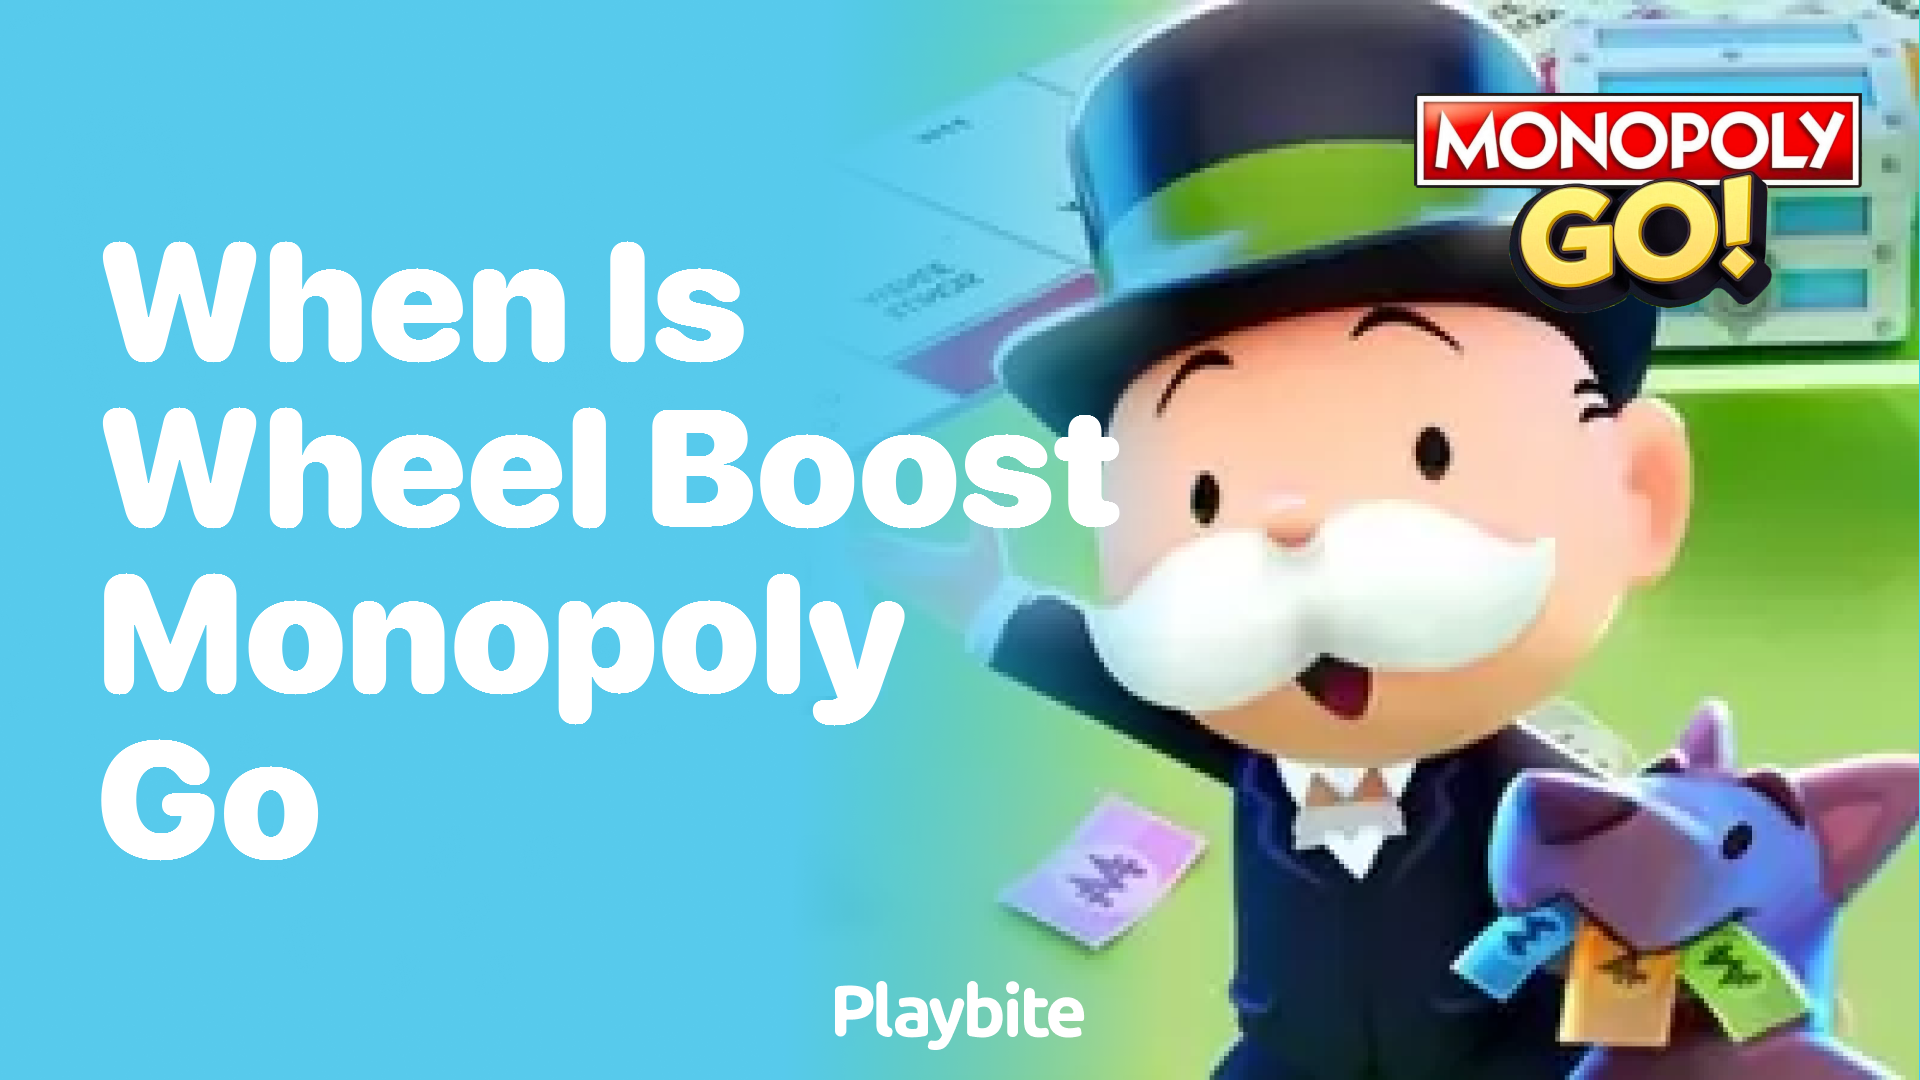 When Can You Use The Wheel Boost in Monopoly Go?